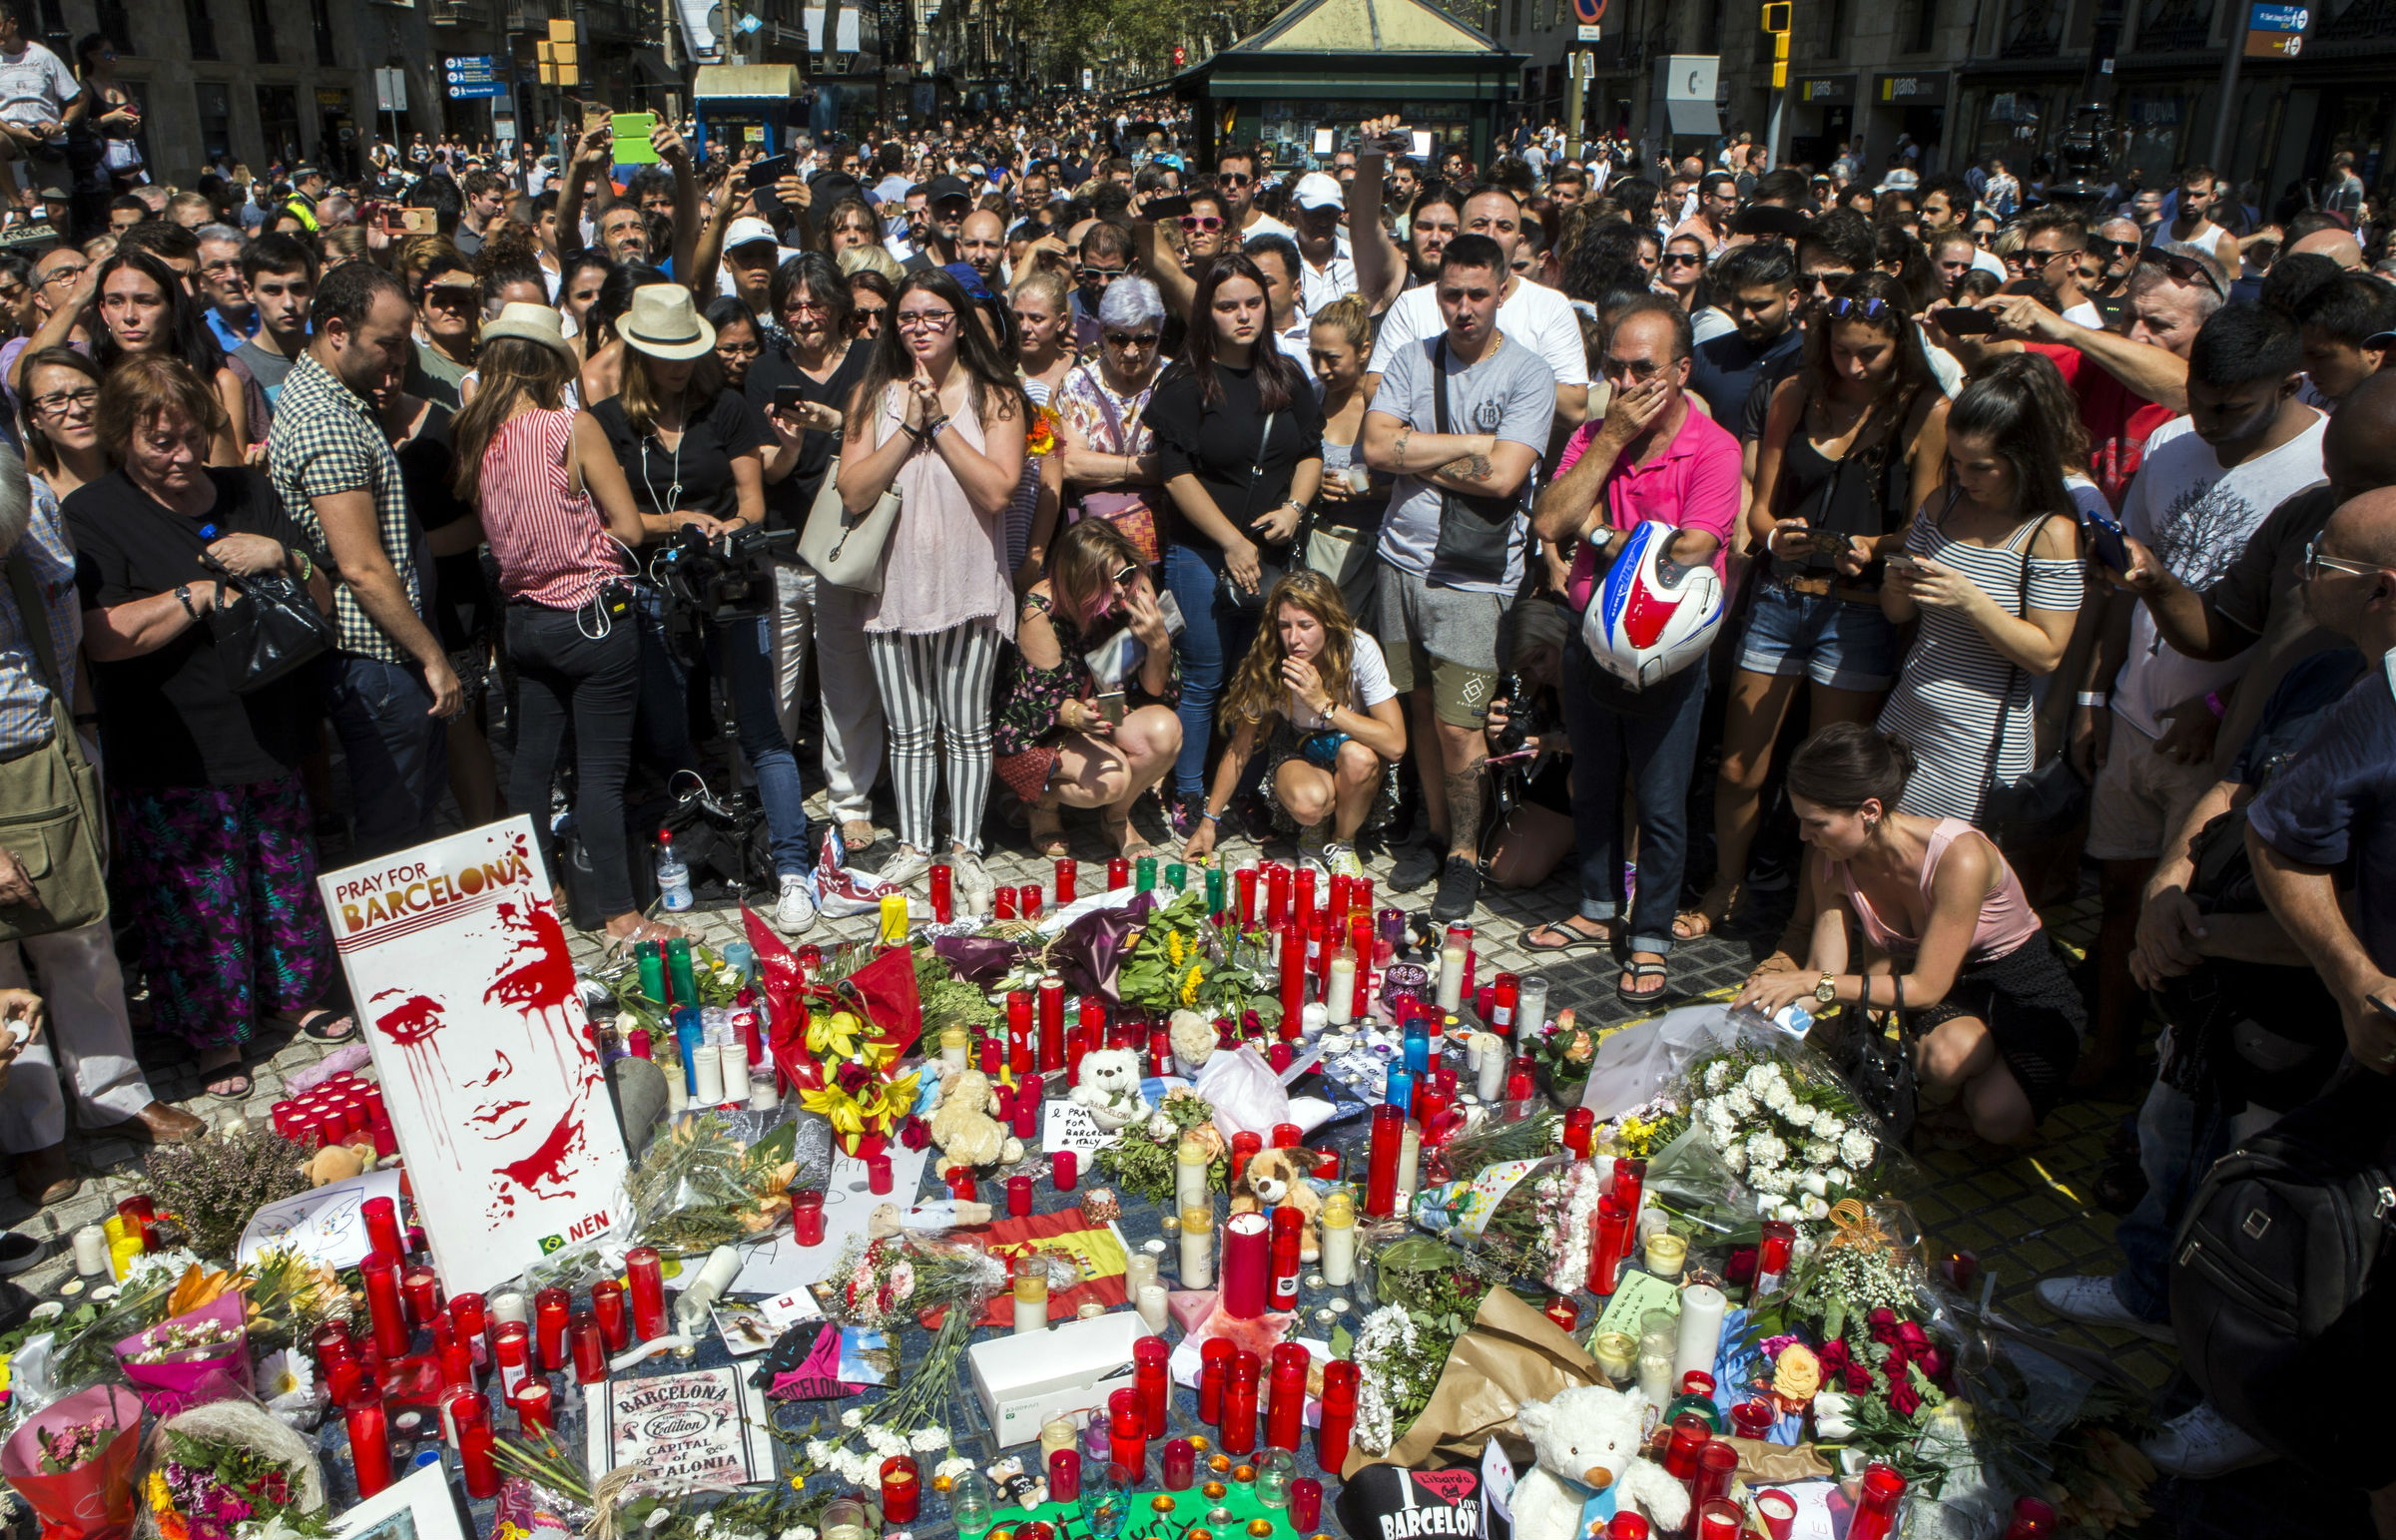 Catholic leaders urge prayers and unity after attacks in Spain 